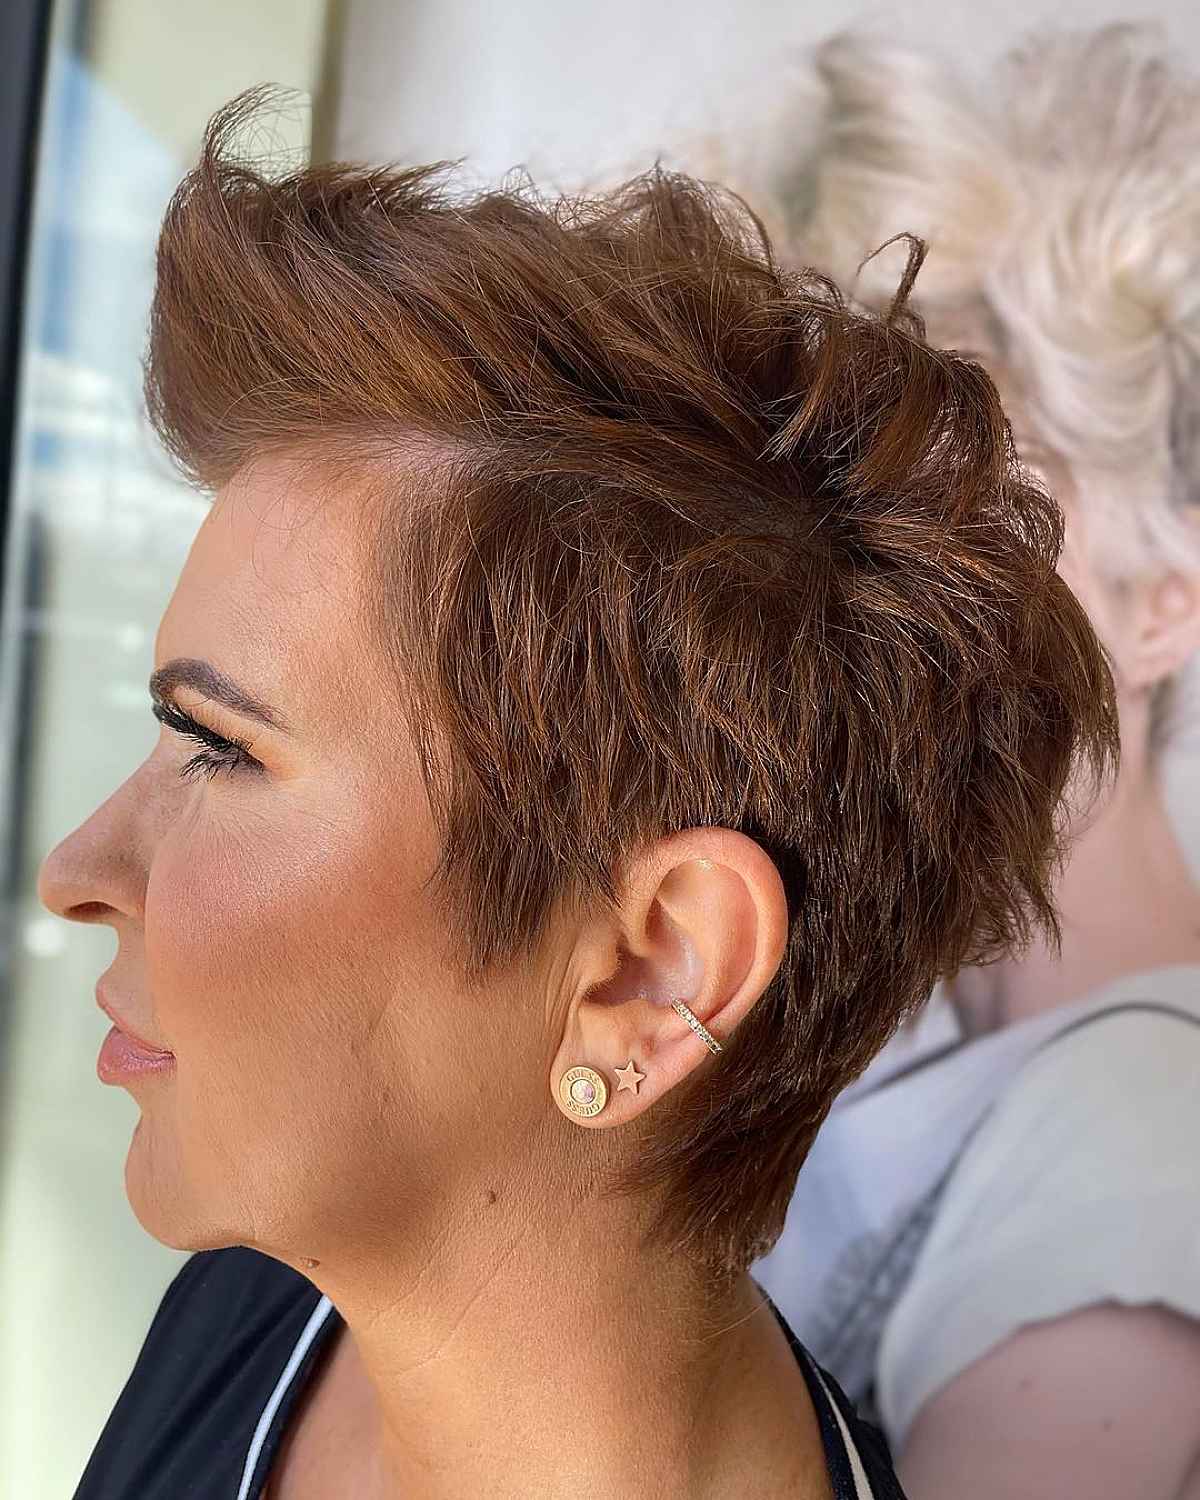 26 Messy Pixie Cuts for a Tousled, Chic Look